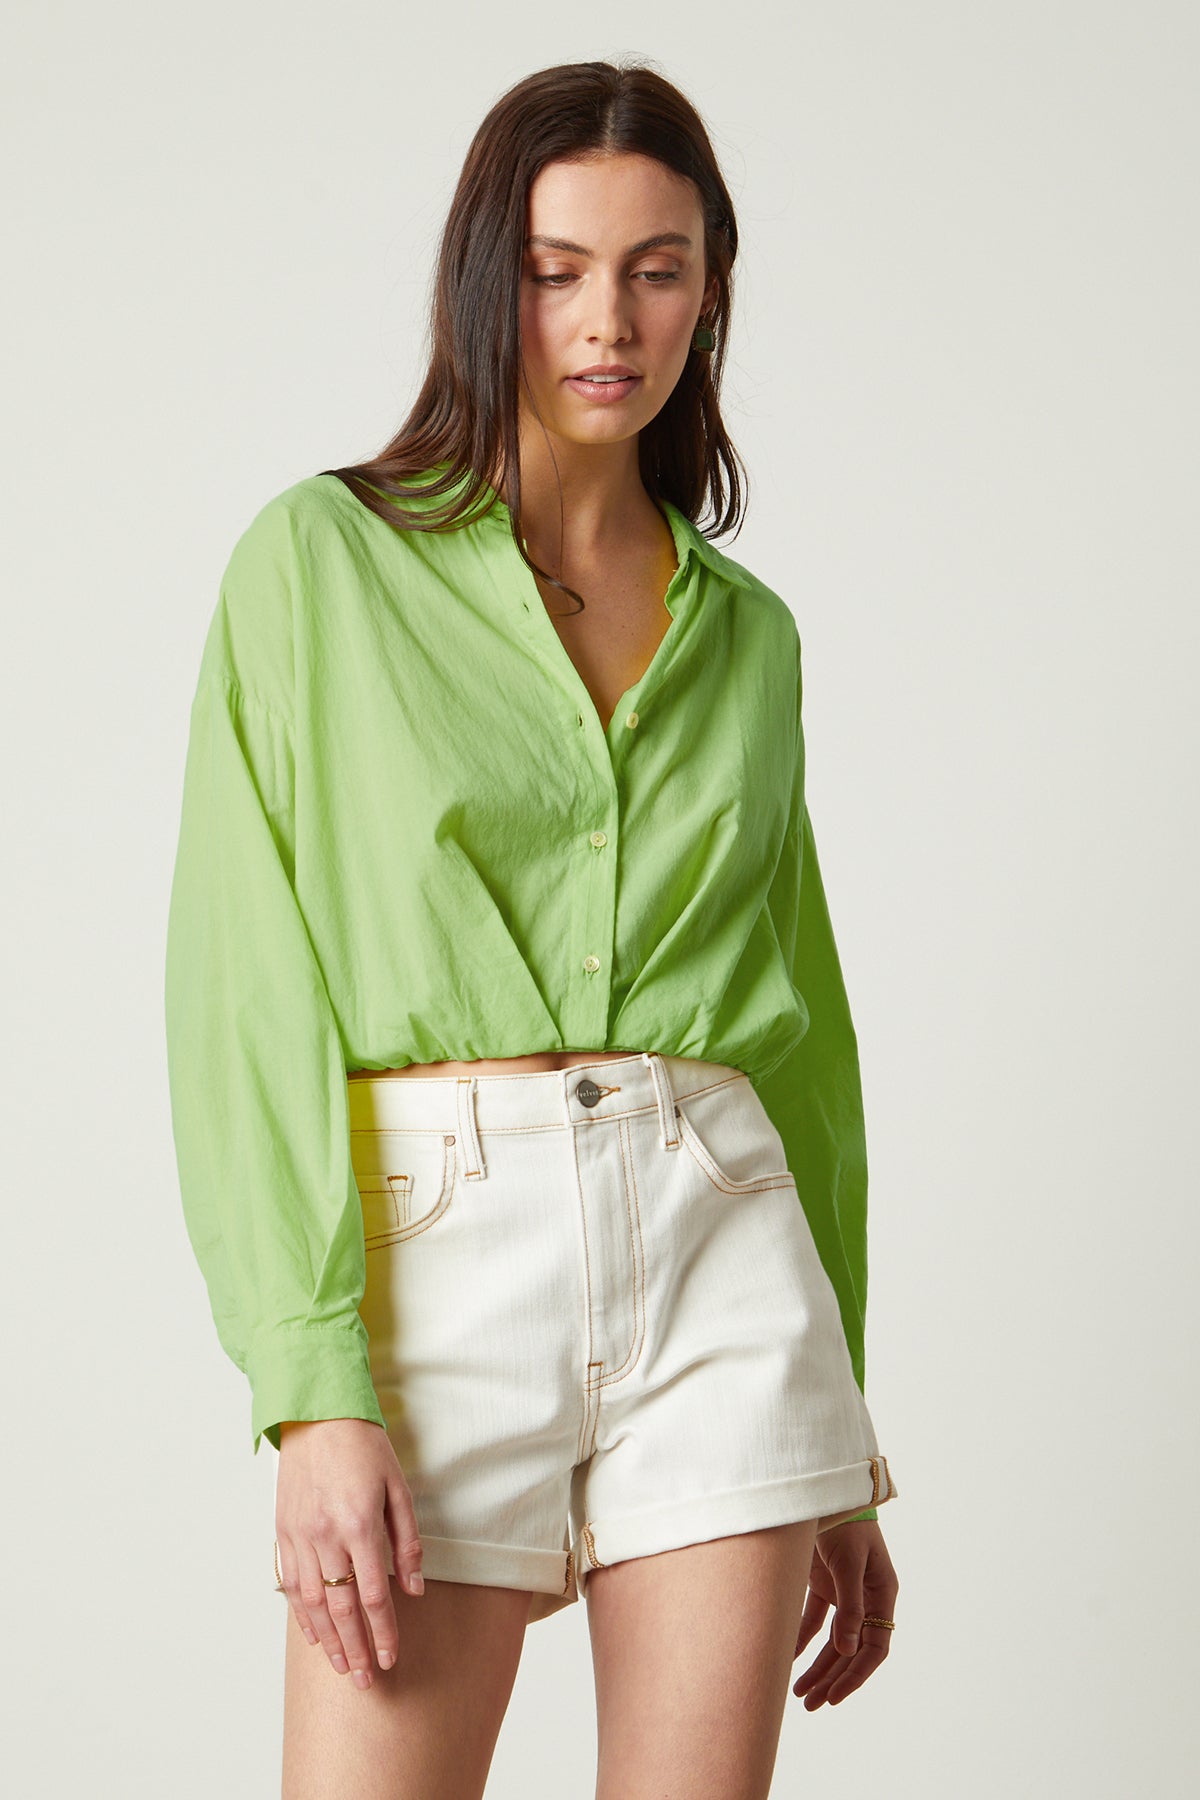   The model is wearing a Velvet by Graham & Spencer JULIA BUTTON-UP CROPPED SHIRT with a lime shirt and elastic hemline. 